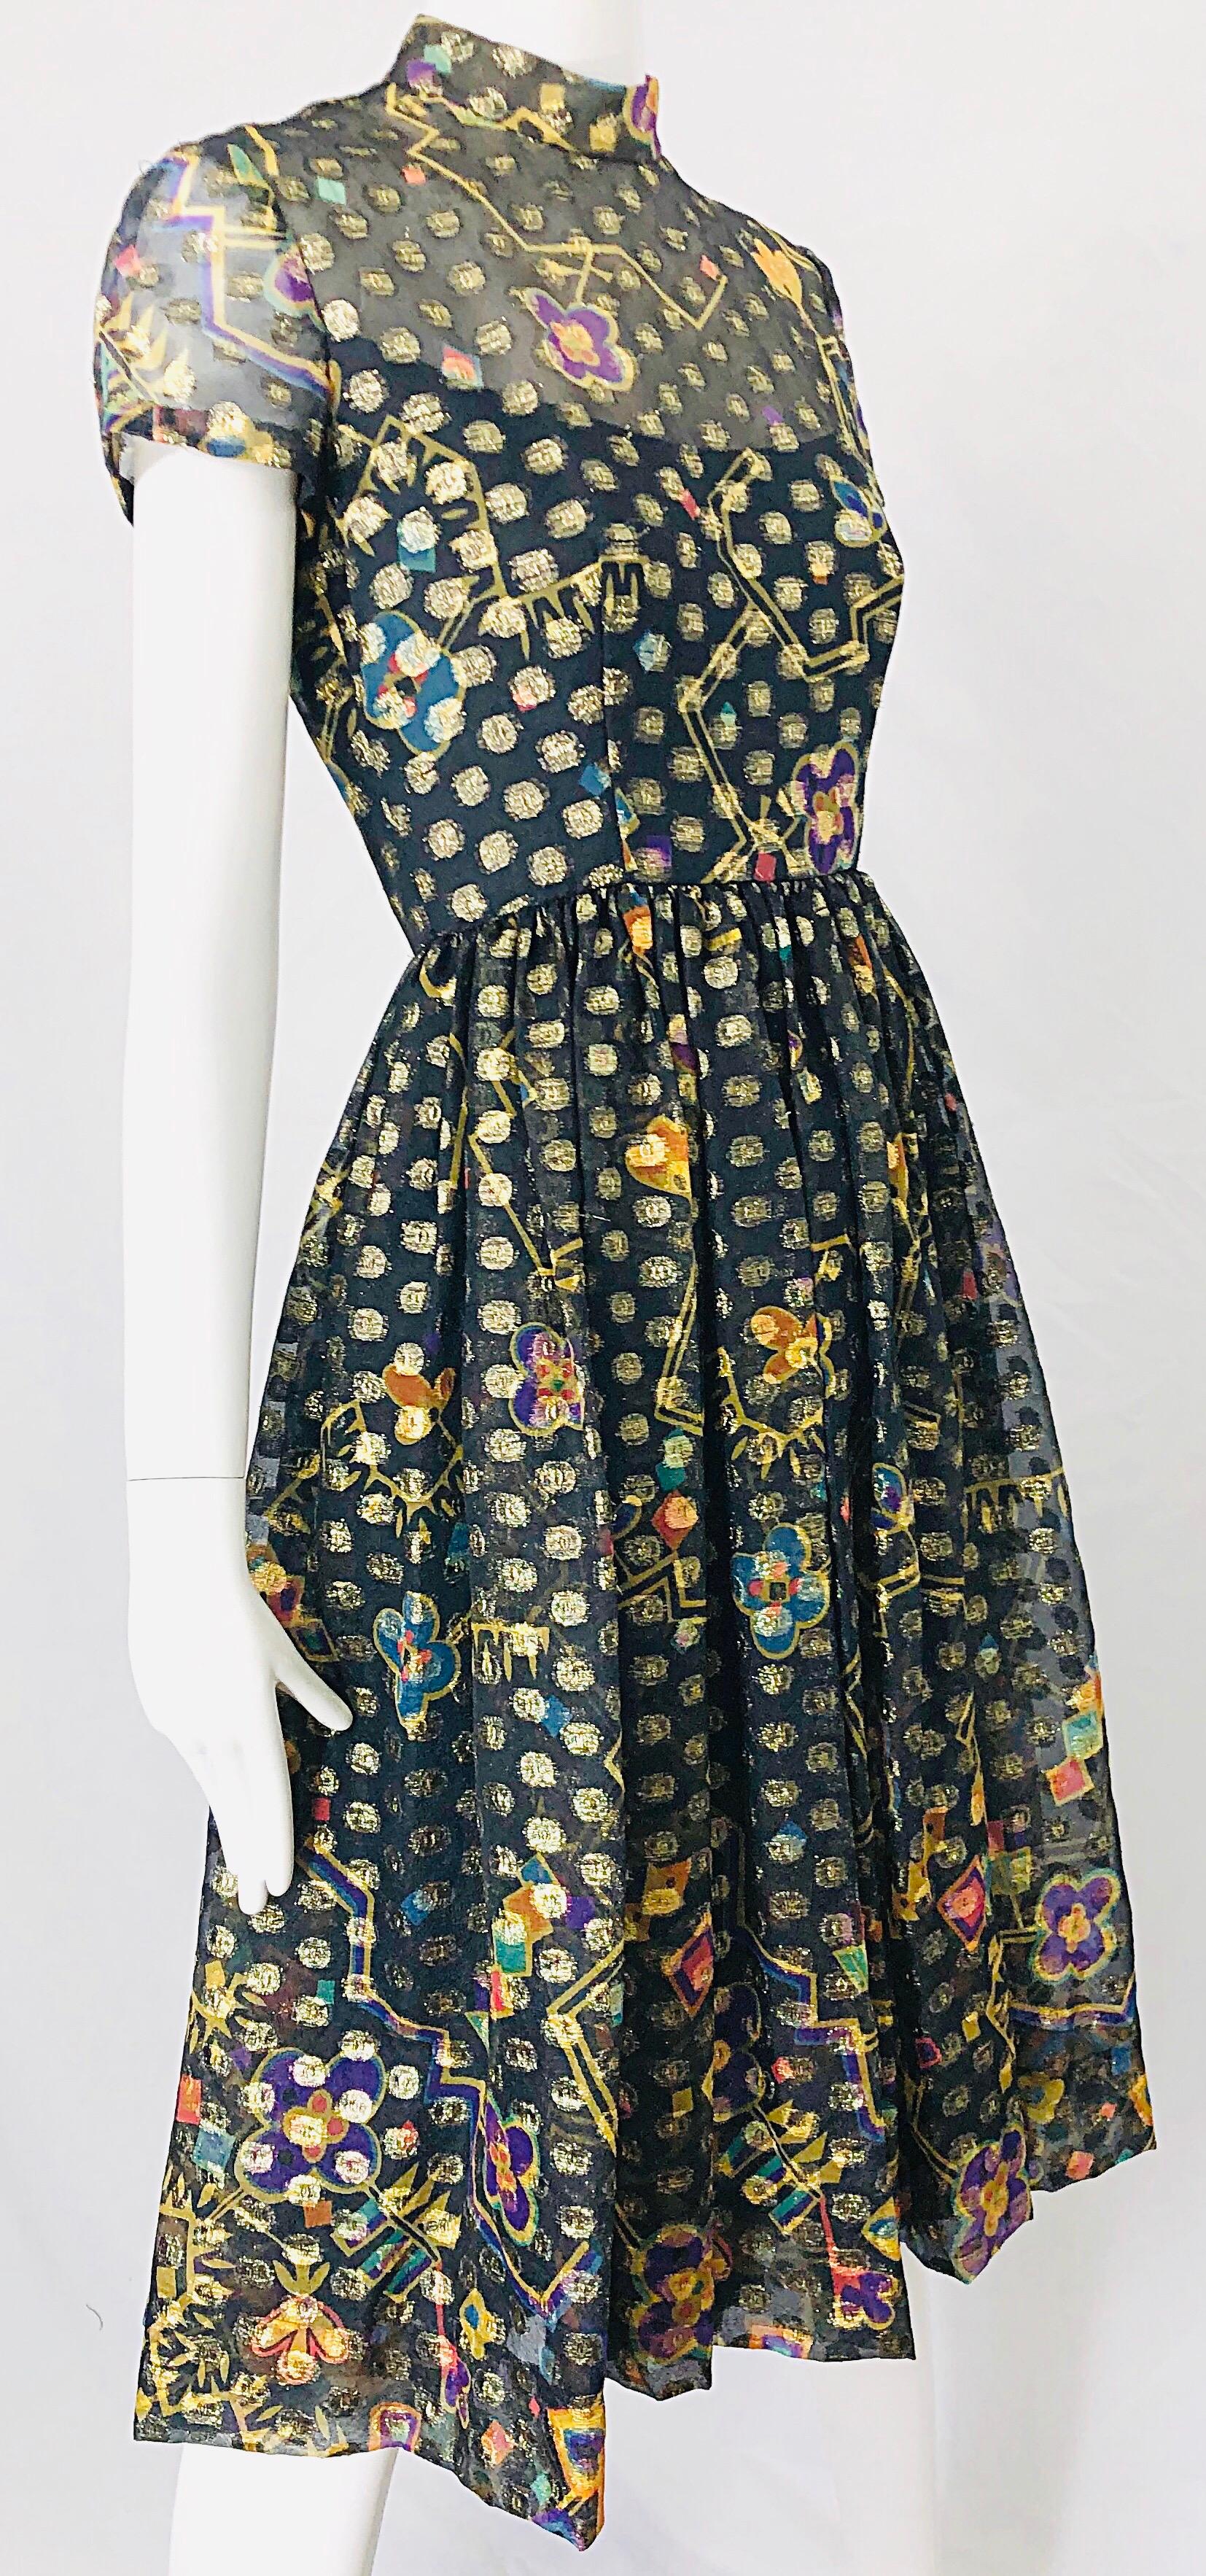 1960s George Halley Silk Chiffon Gold Flower Polka Dot Vintage 60s Dress In Excellent Condition For Sale In San Diego, CA